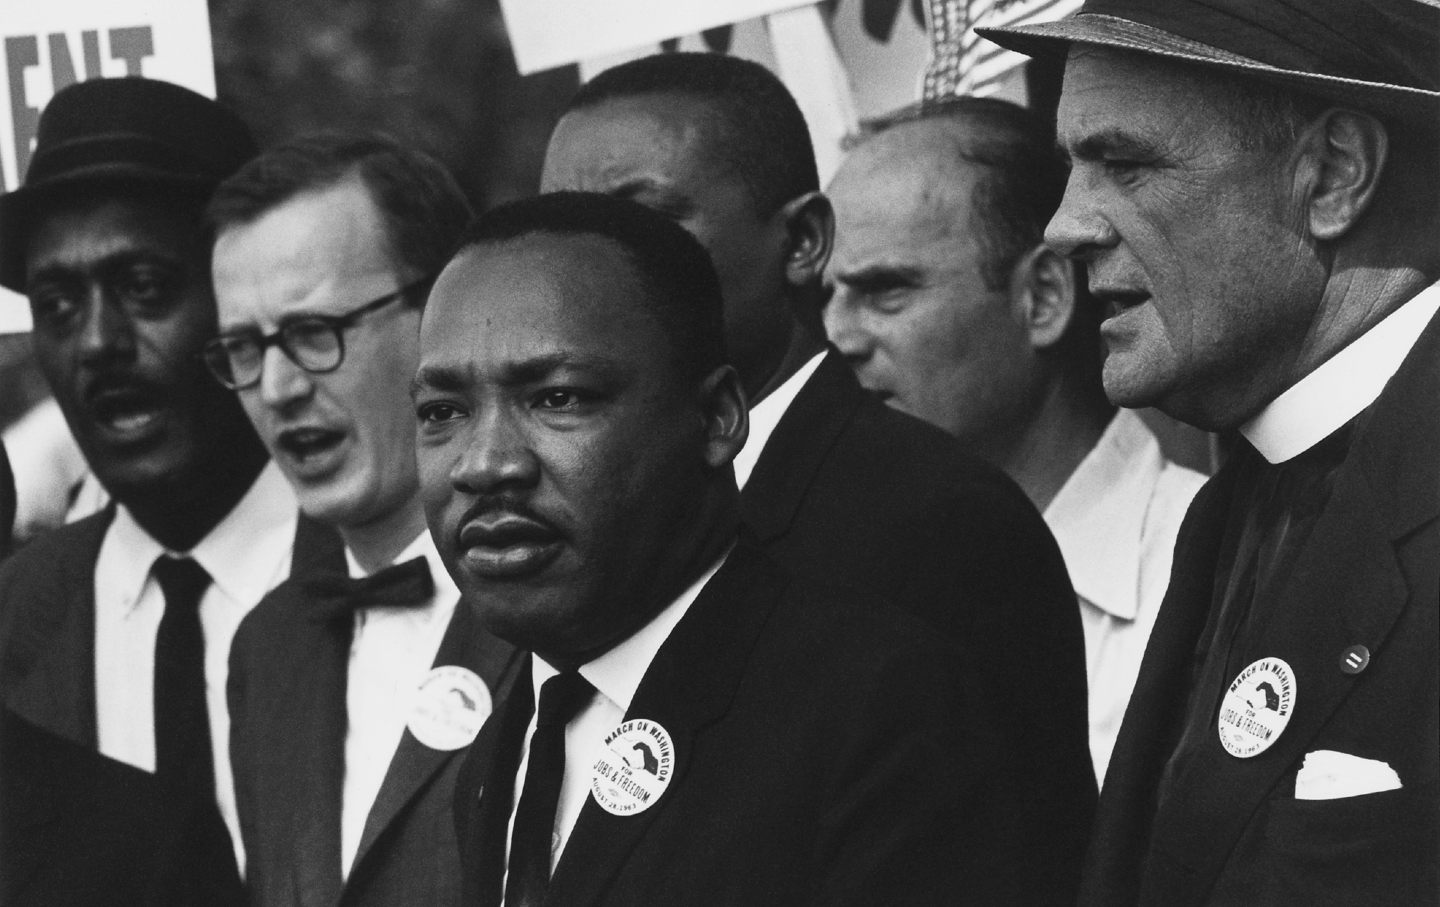 Martin Luther King Jr. at the March on Washington